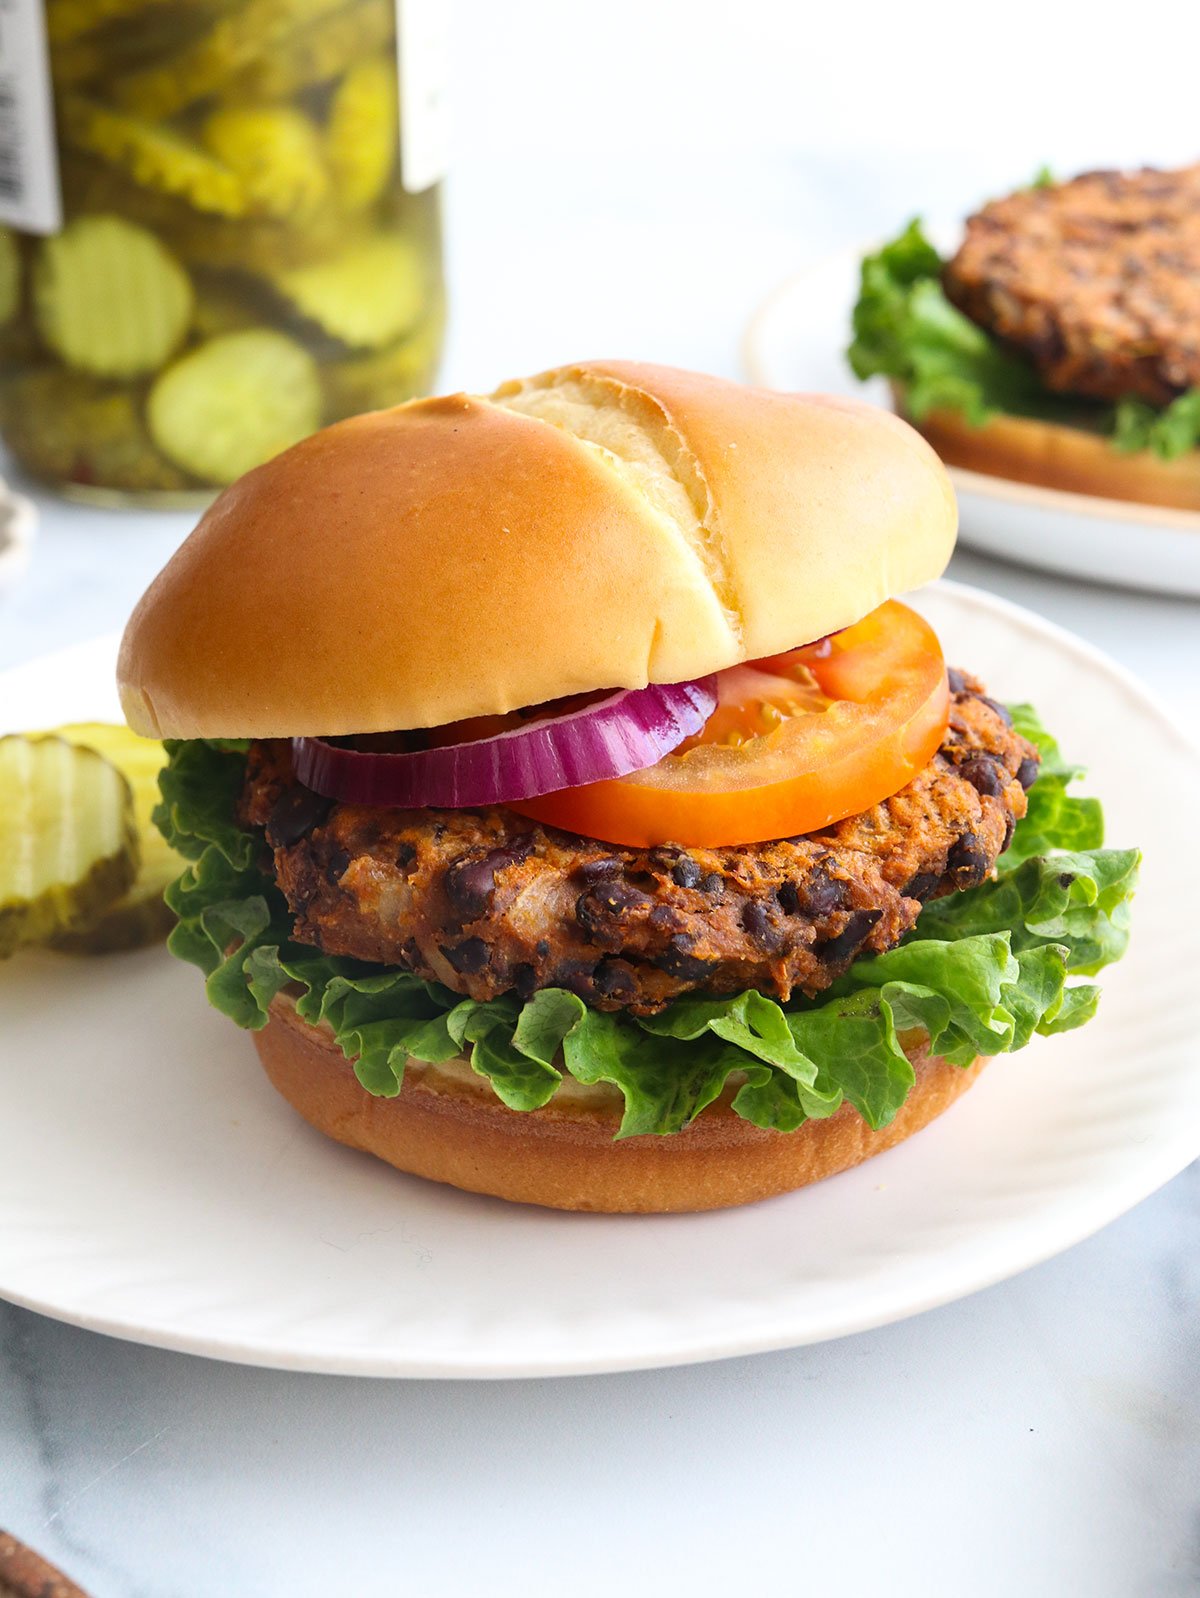 sweet potato black bean burger served on a bun with lettuce and tomato.